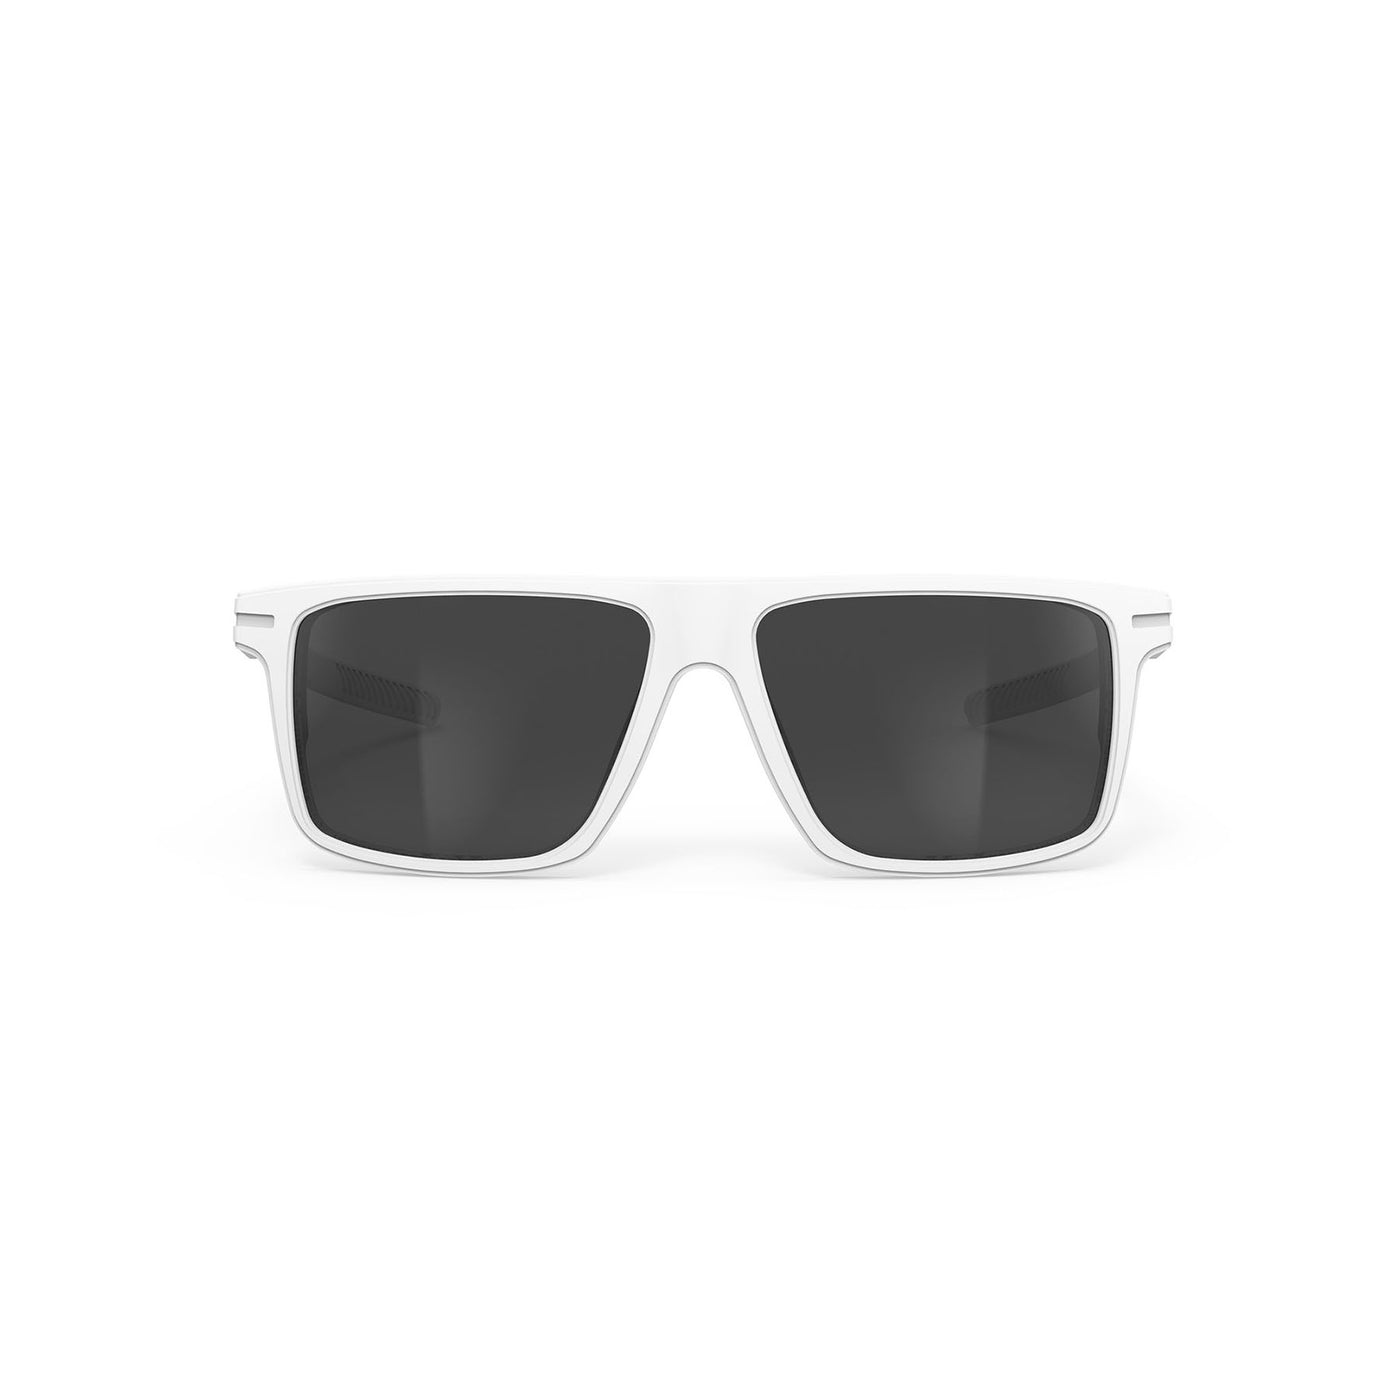 Rudy Project Stellar lifestyle, beach, boating and fishing prescription sunglasses#color_stellar-white-matte-frame-with-smoke-black-lenses